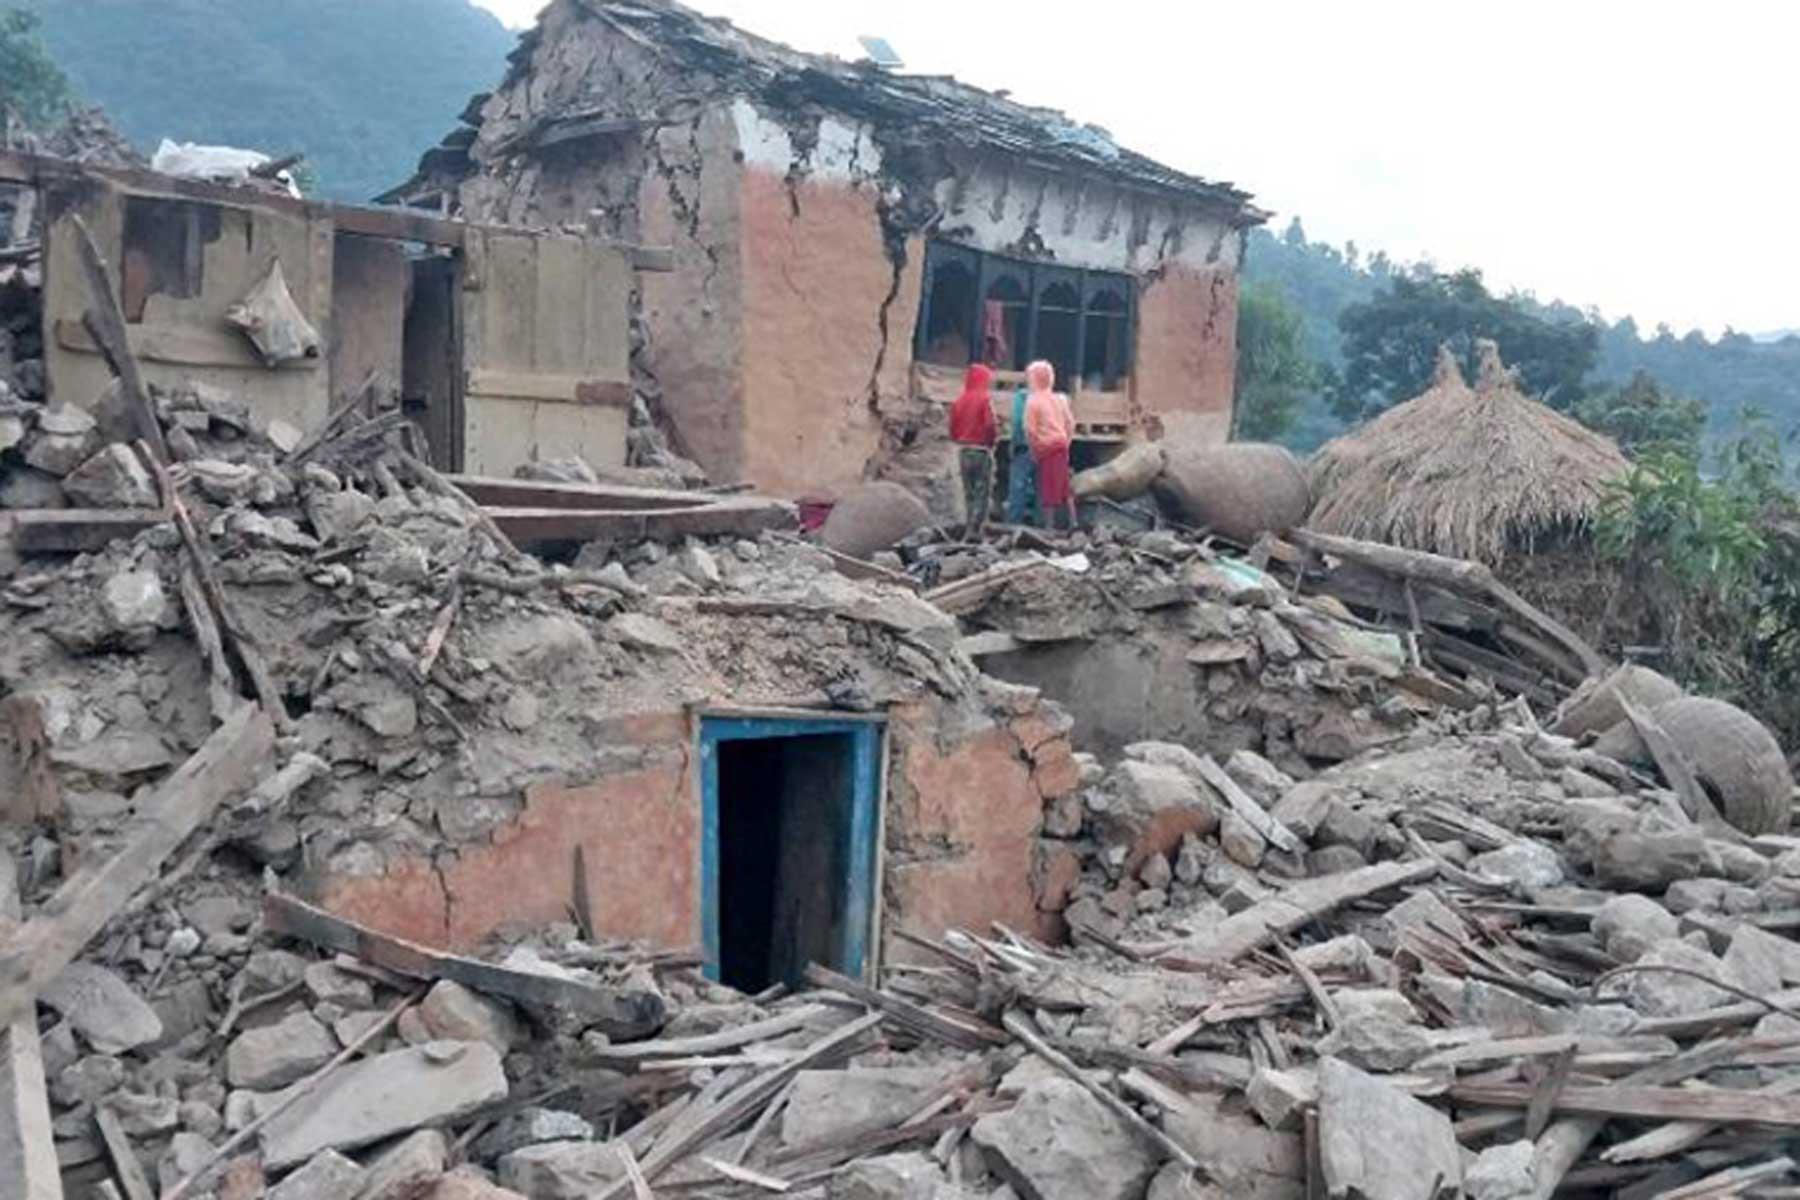 Damage in Pubichouki village, as seen the day after the main earthquake. Photo: onlinekhabar 